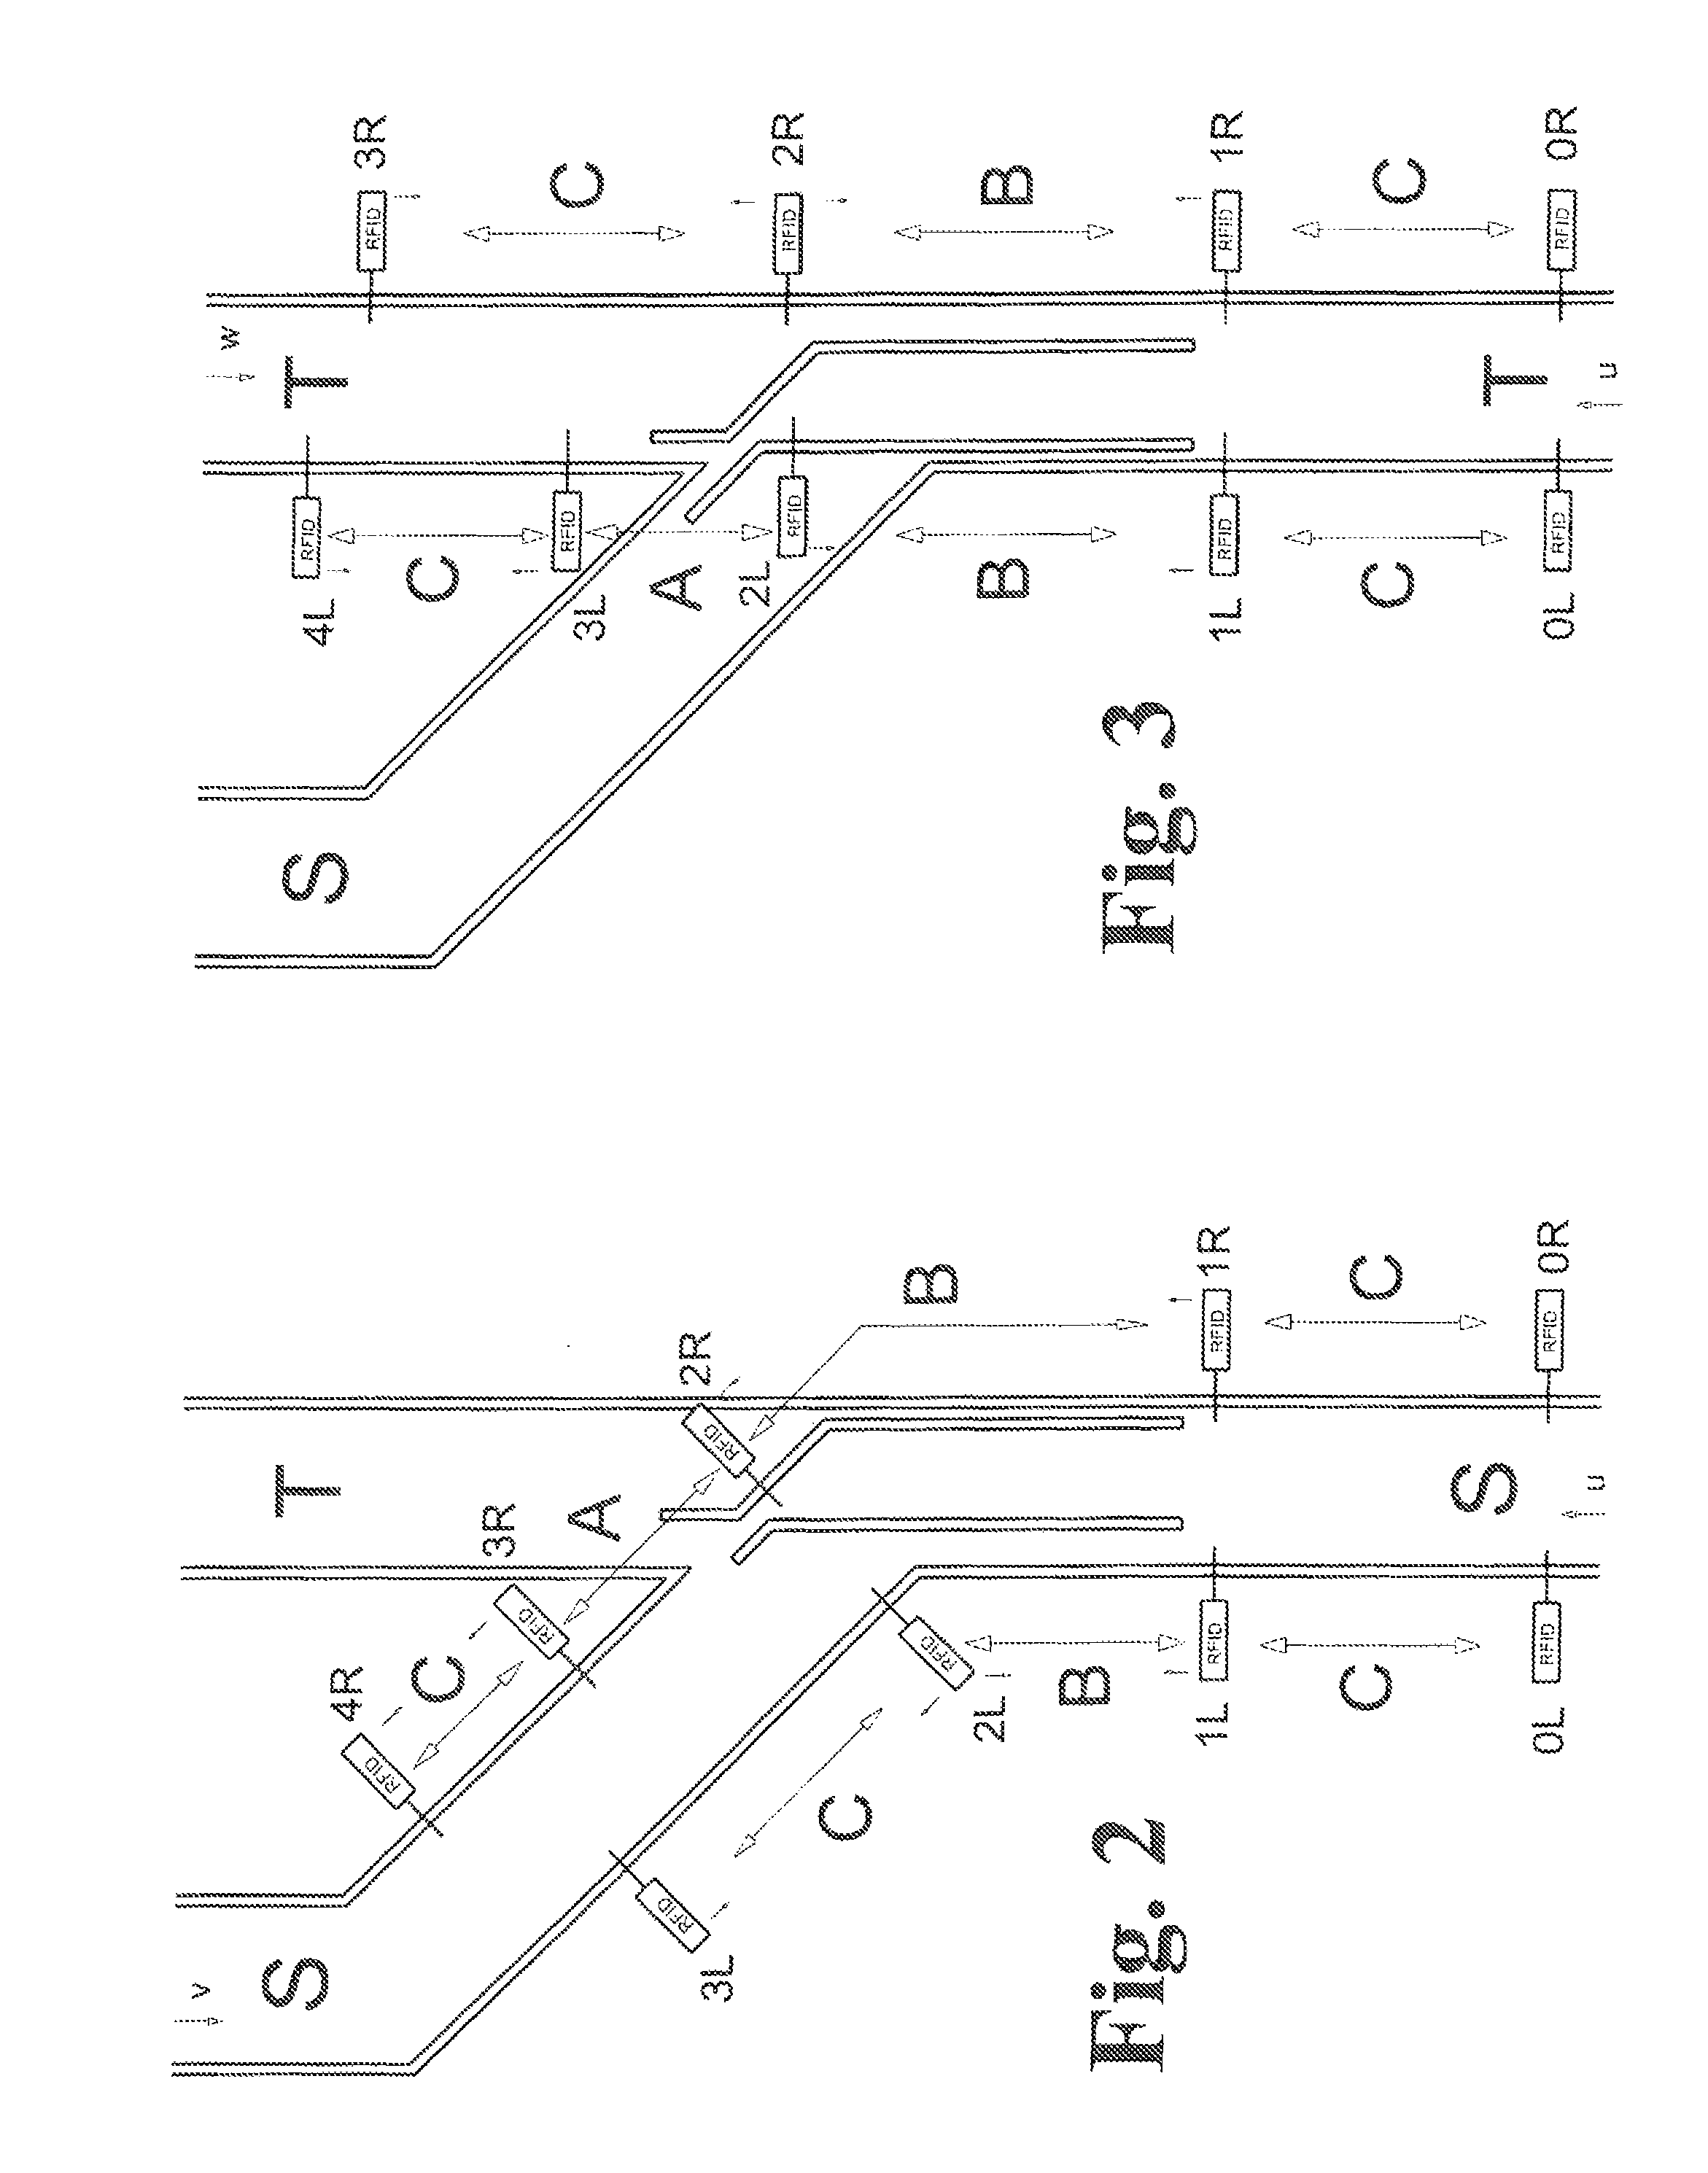 Arrangement for measuring sections of track for the purpose of maintaining railroad tracks